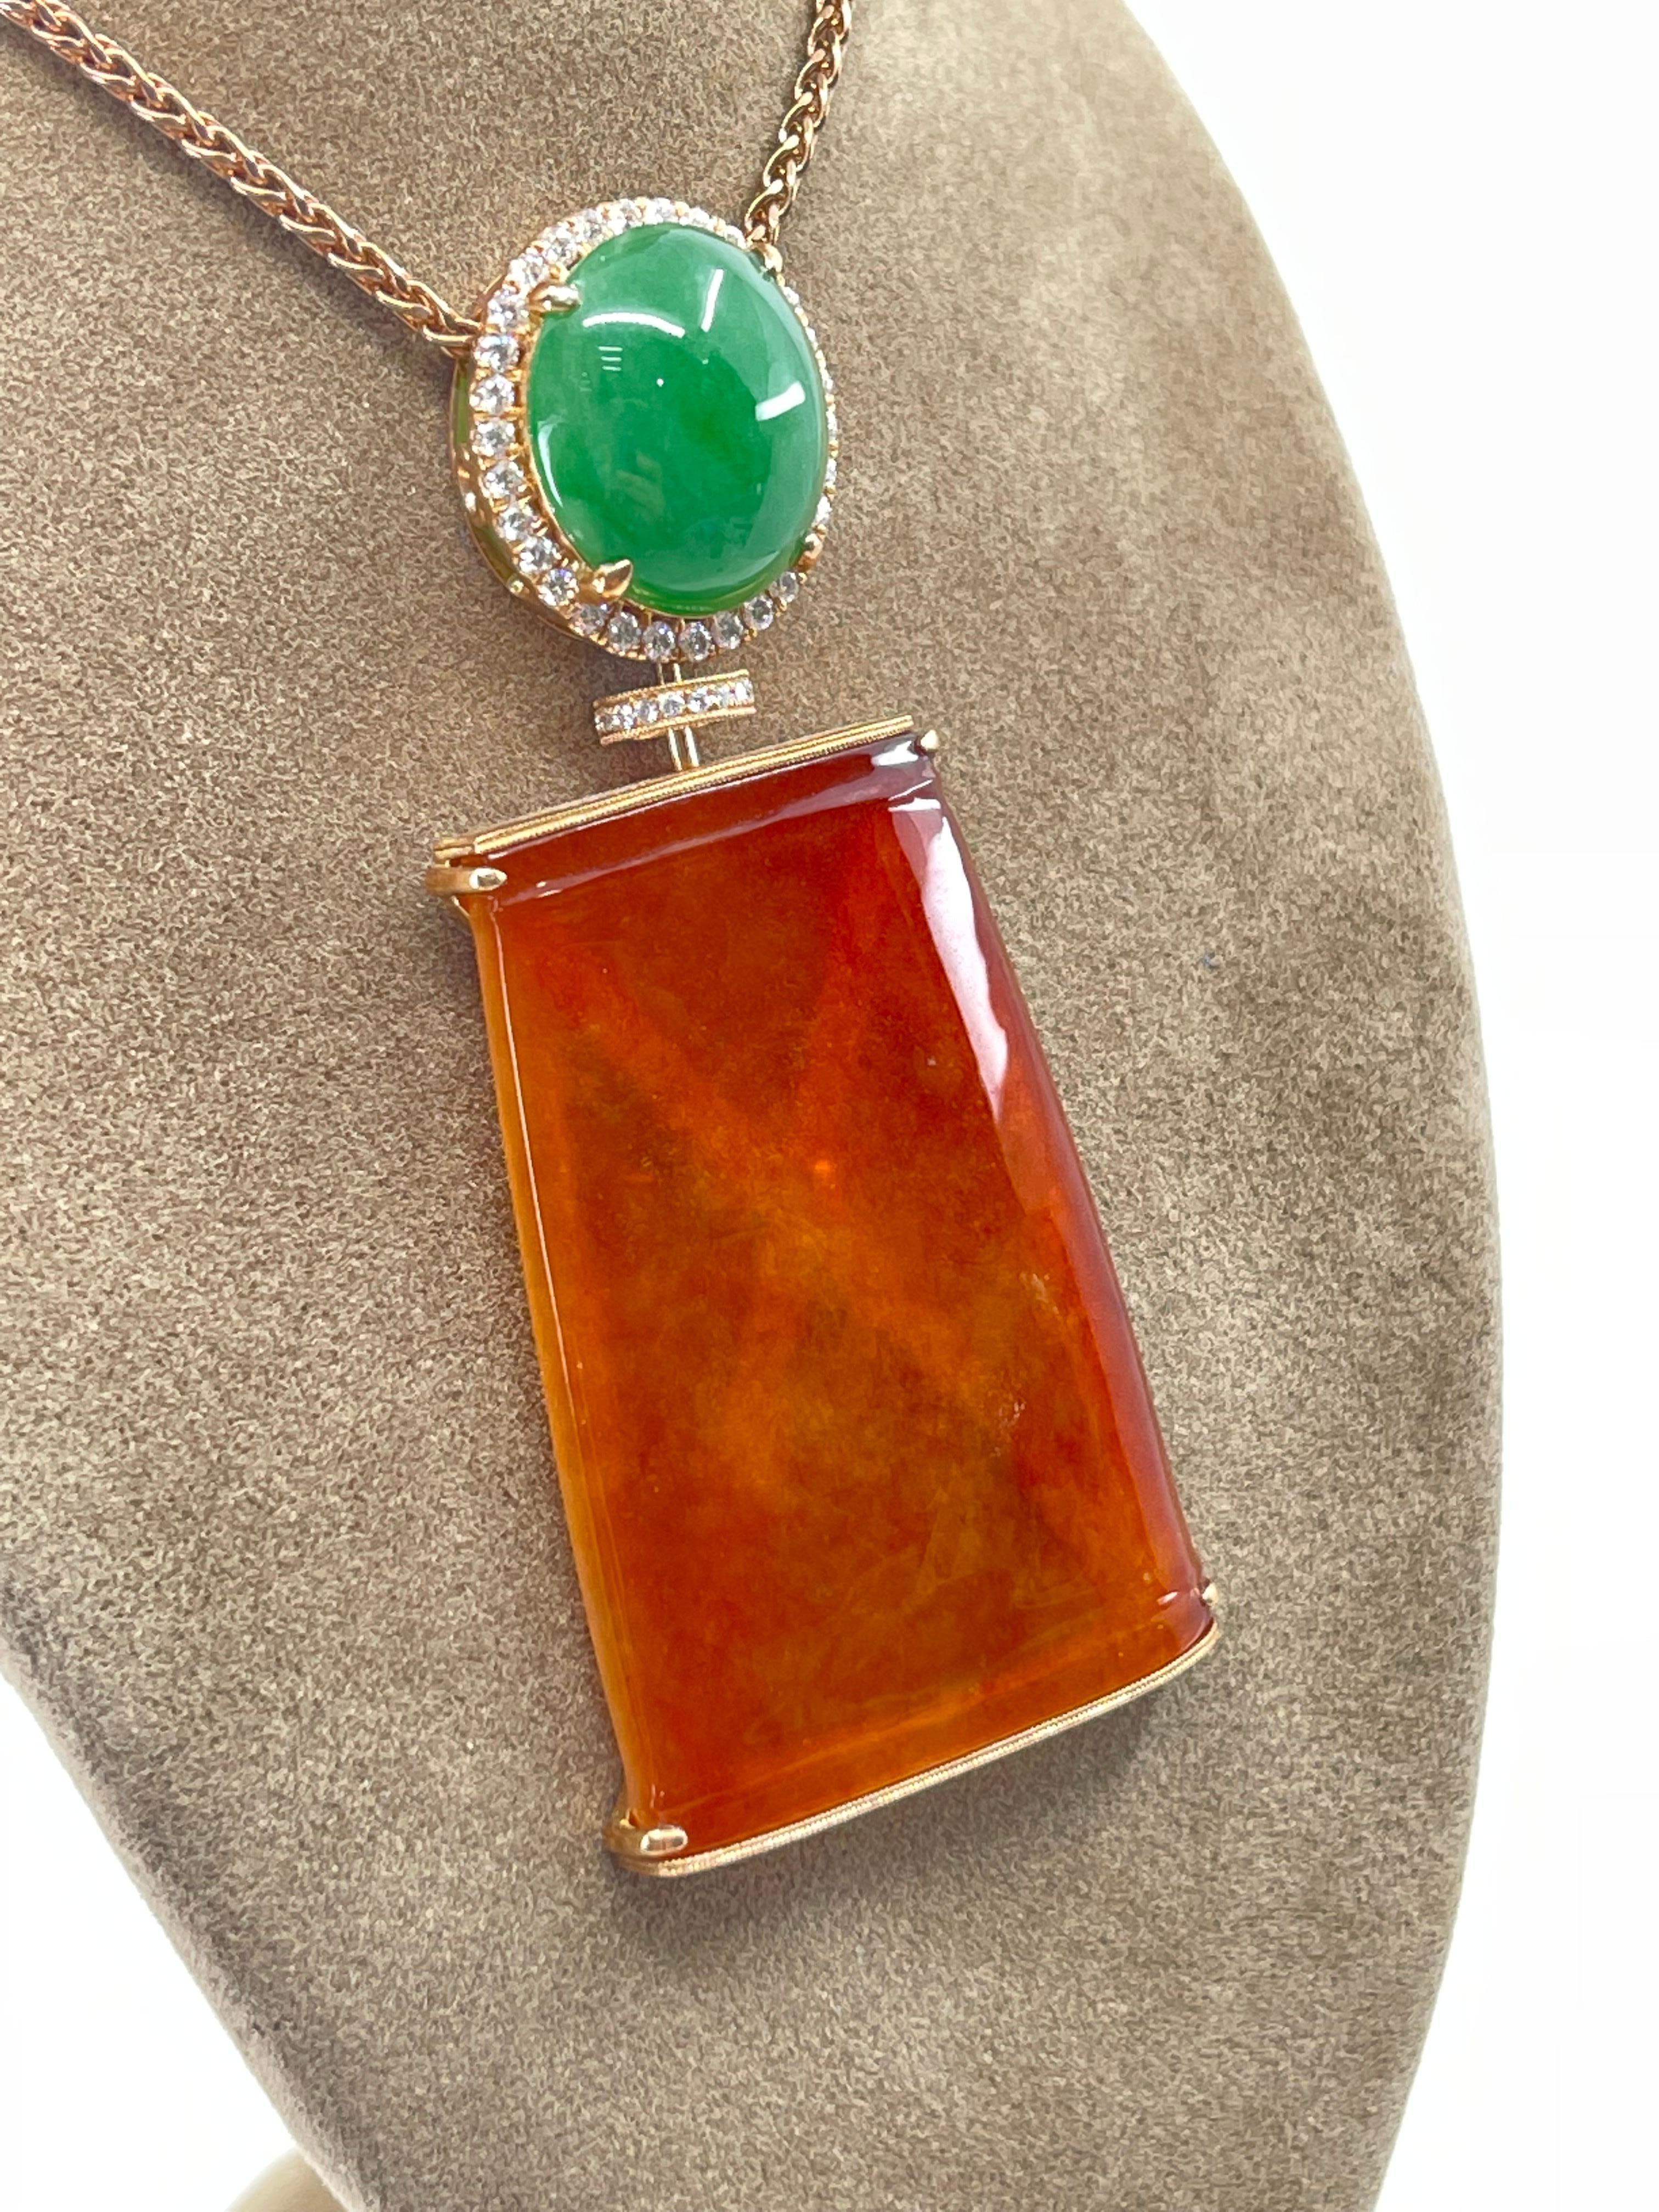 Certified Natural Red Jade & Diamond Pendant Necklace 18k Rose Gold. Reversible. For Sale 5